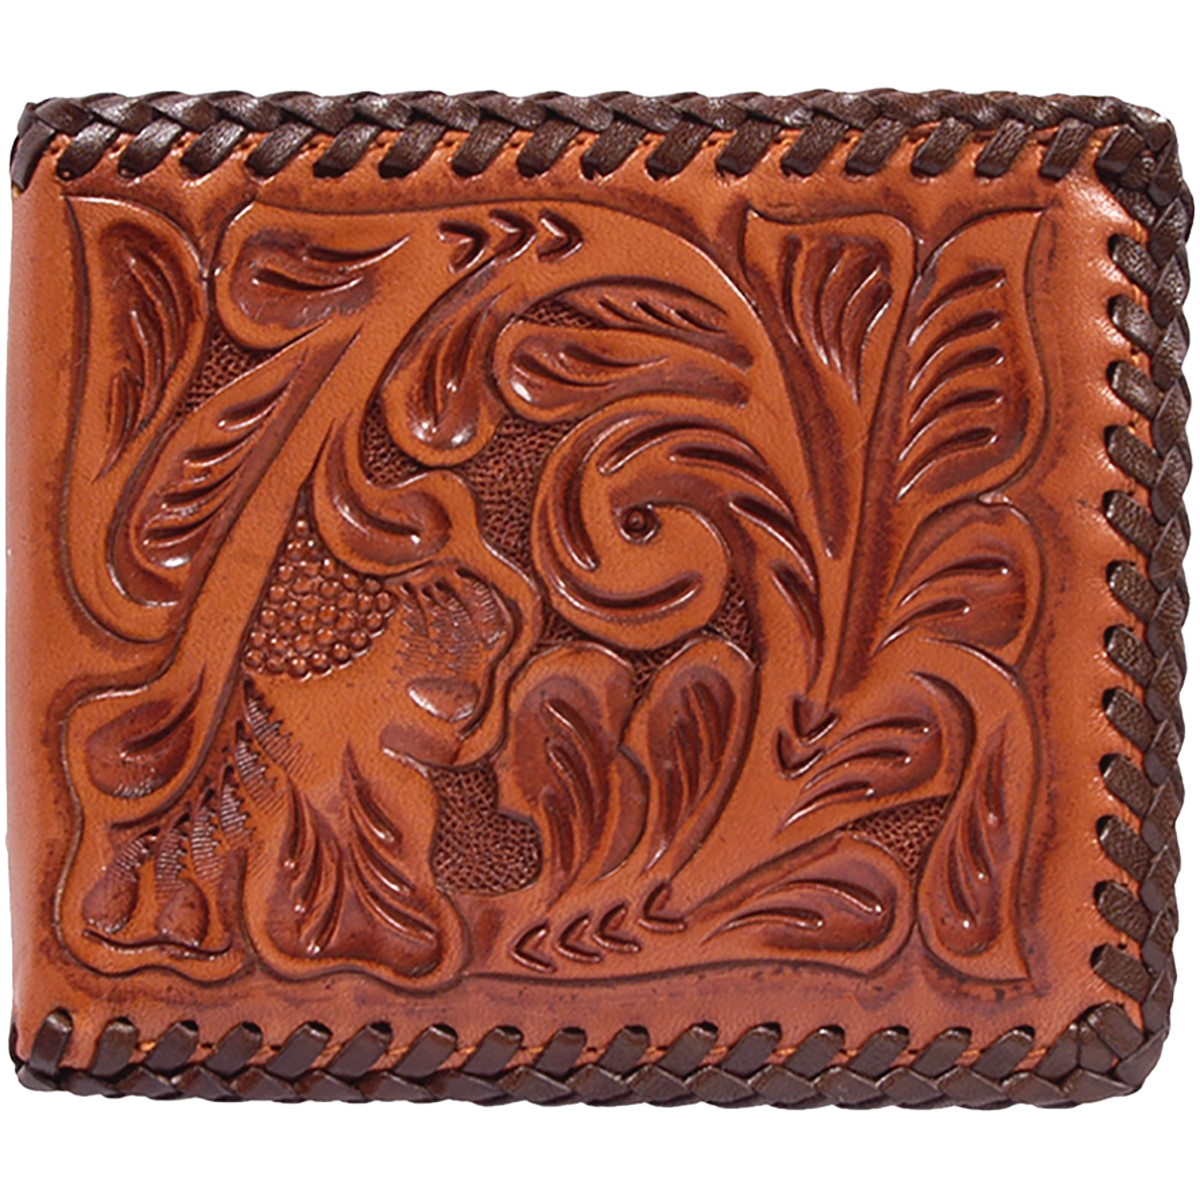 3D Men's Floral Hand Tooled Bifold Leather Wallet DAW127